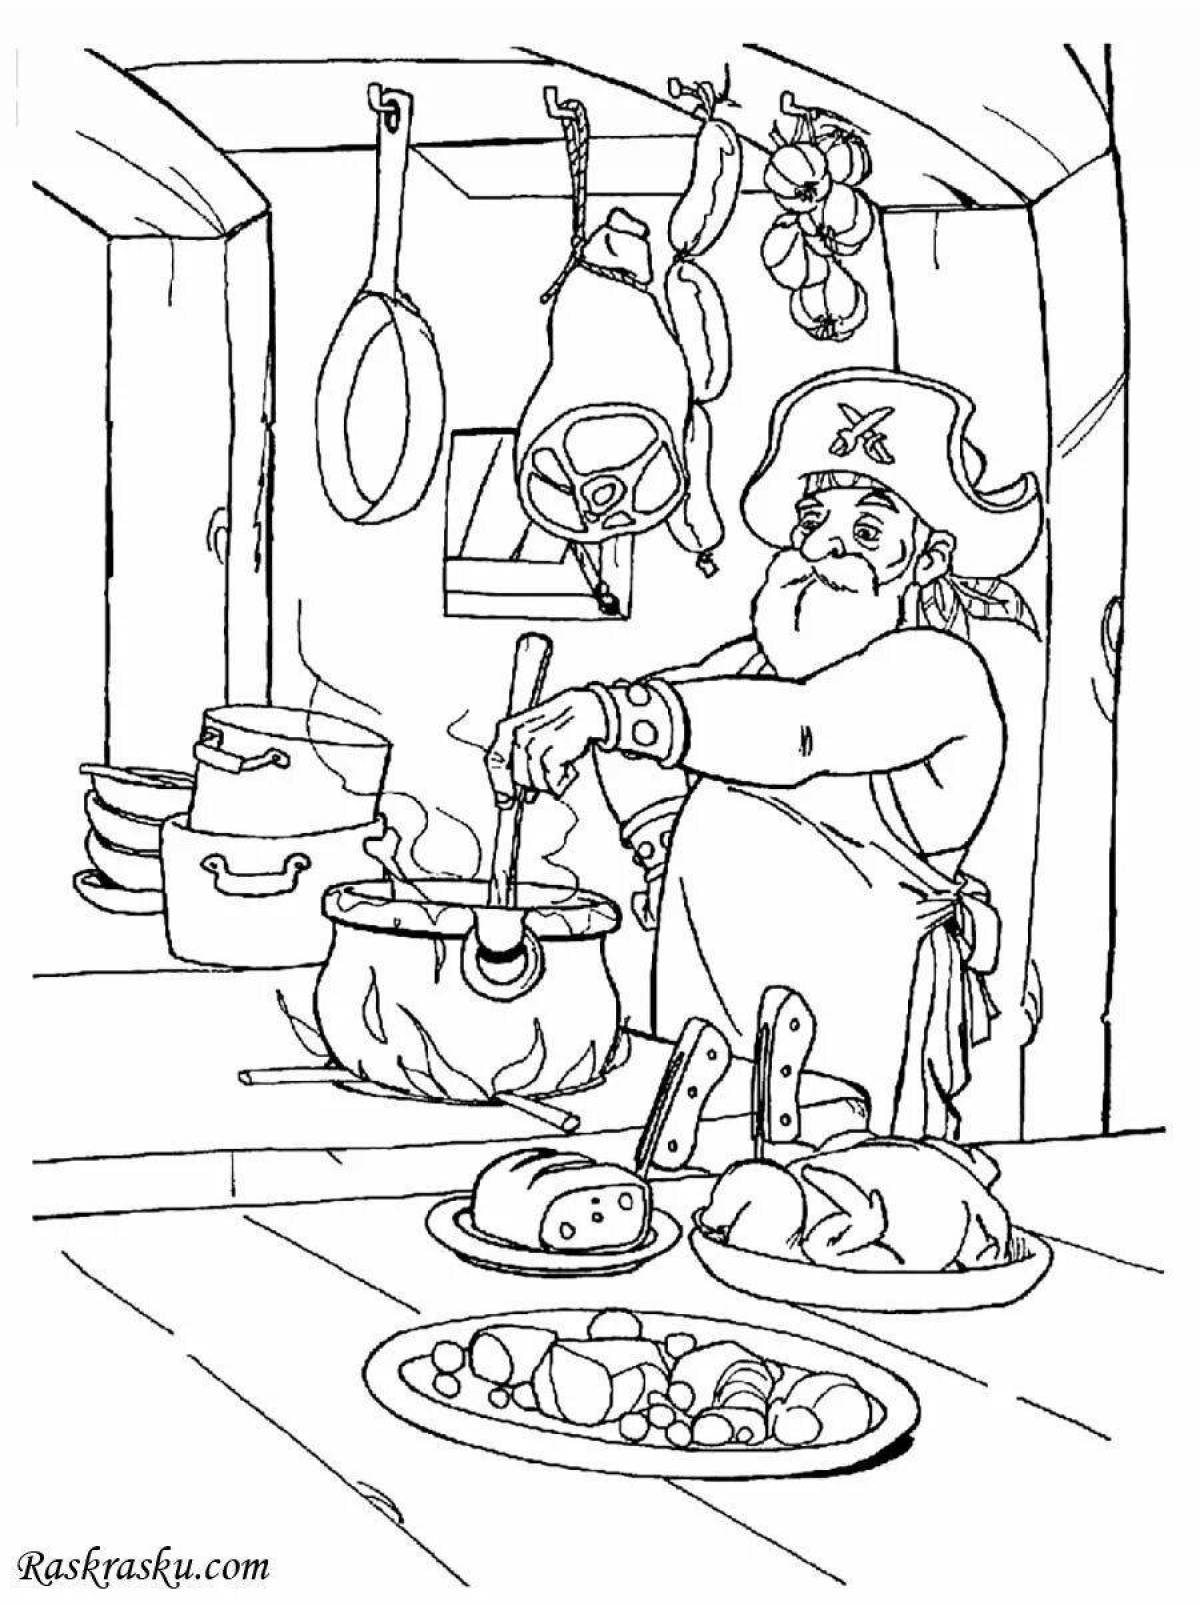 Coloring page festive Russian cuisine